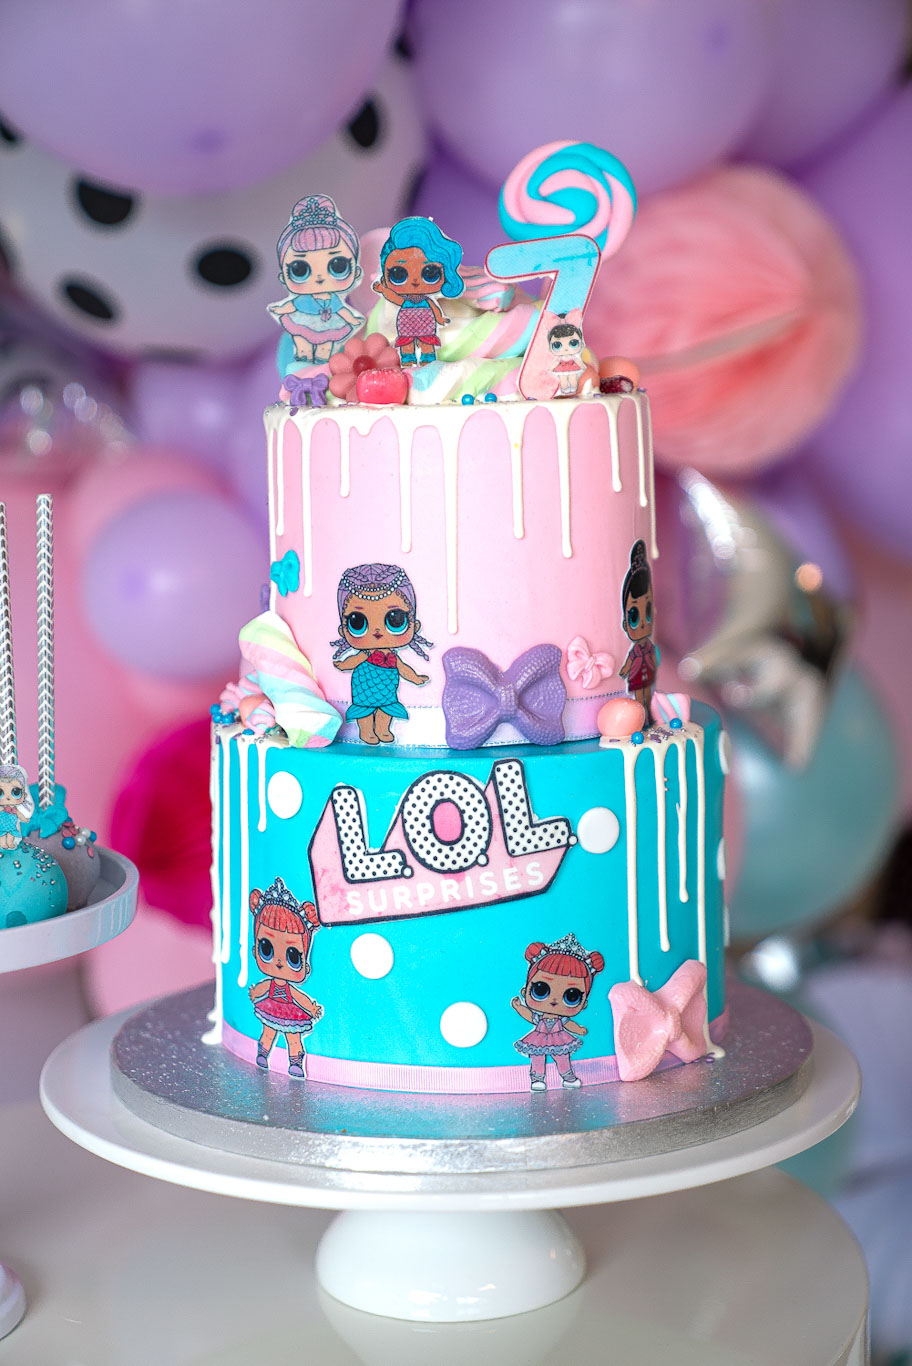 LOL Surprise Cake - 1001 – Cakes and Memories Bakeshop